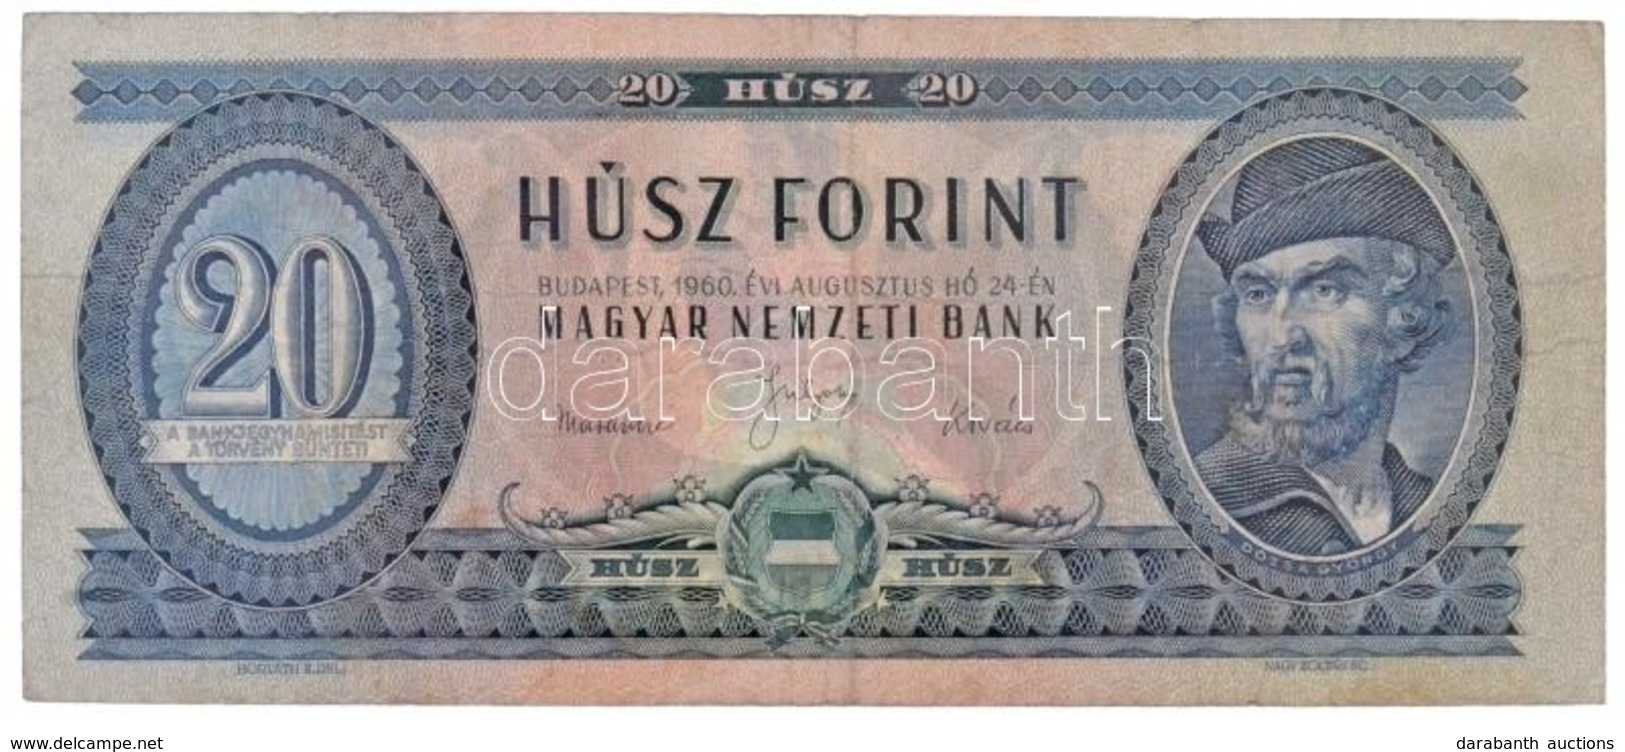 1960. 20Ft 'C146 031971' Sorszámmal T:III / Hungary 1960. 20 Forint With 'C146 031971' Serial Number C:F
Adamo F12 - Unclassified